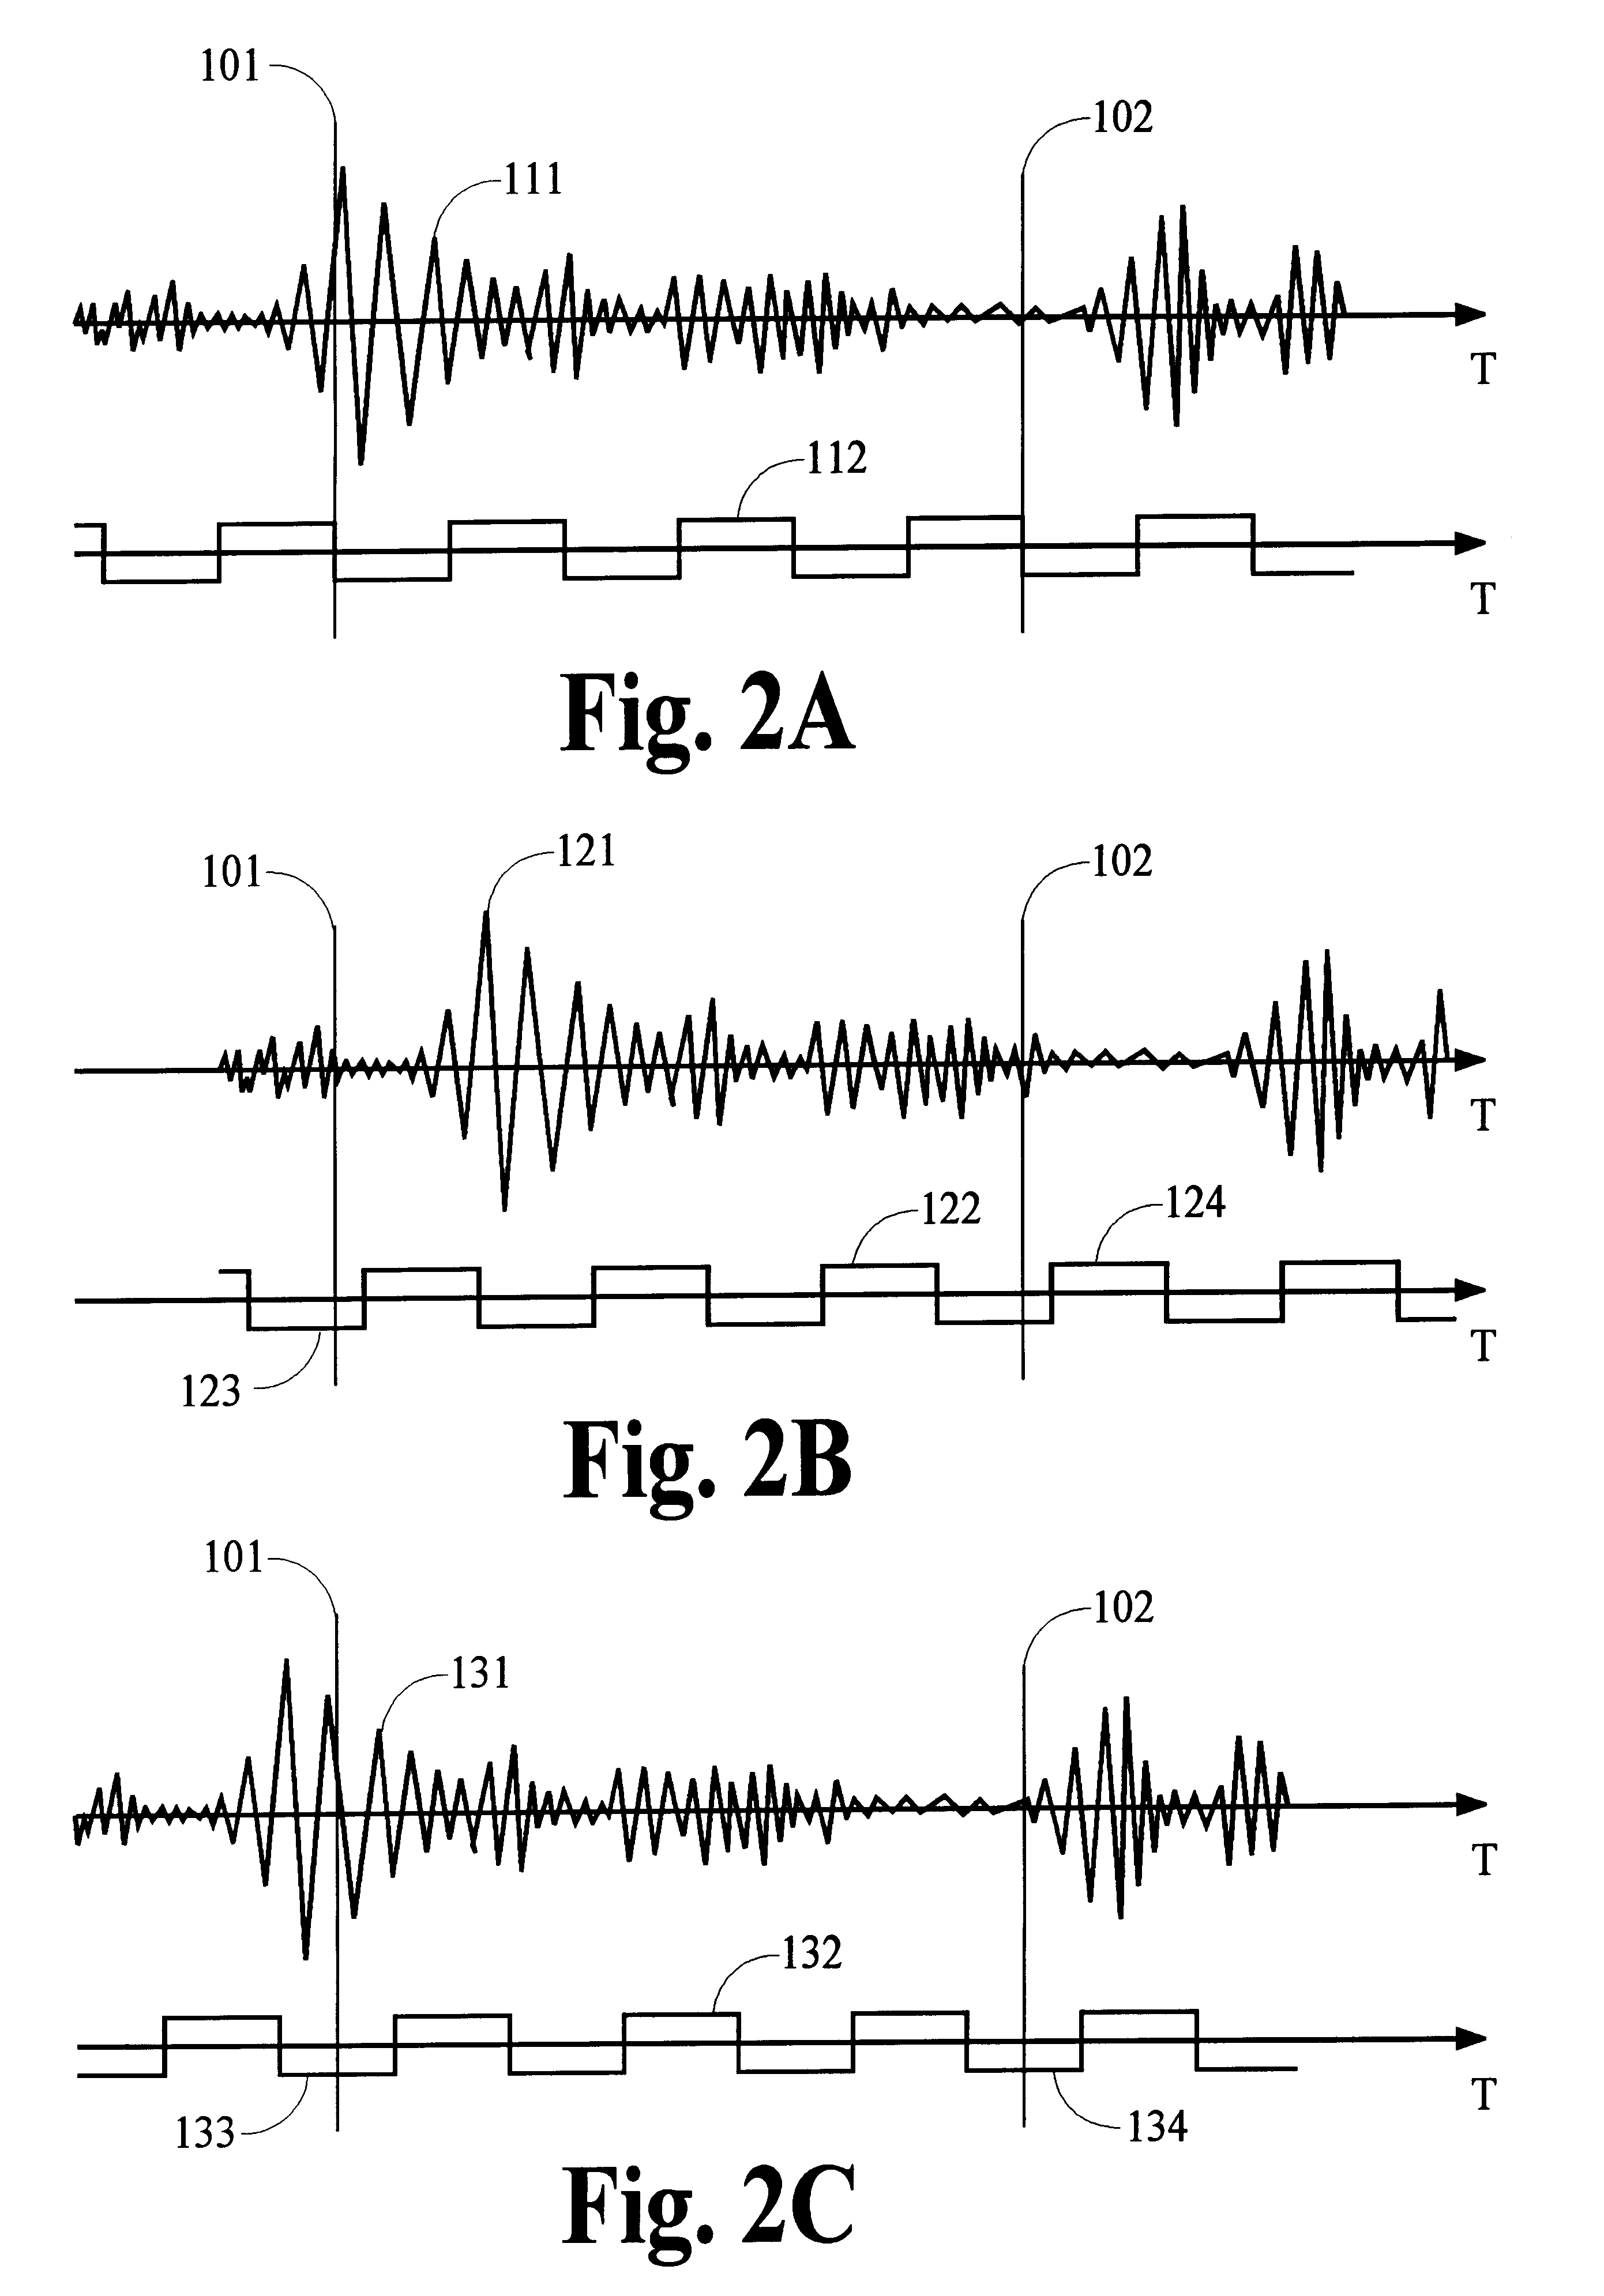 Providing auxiliary information with frame-based encoded audio information